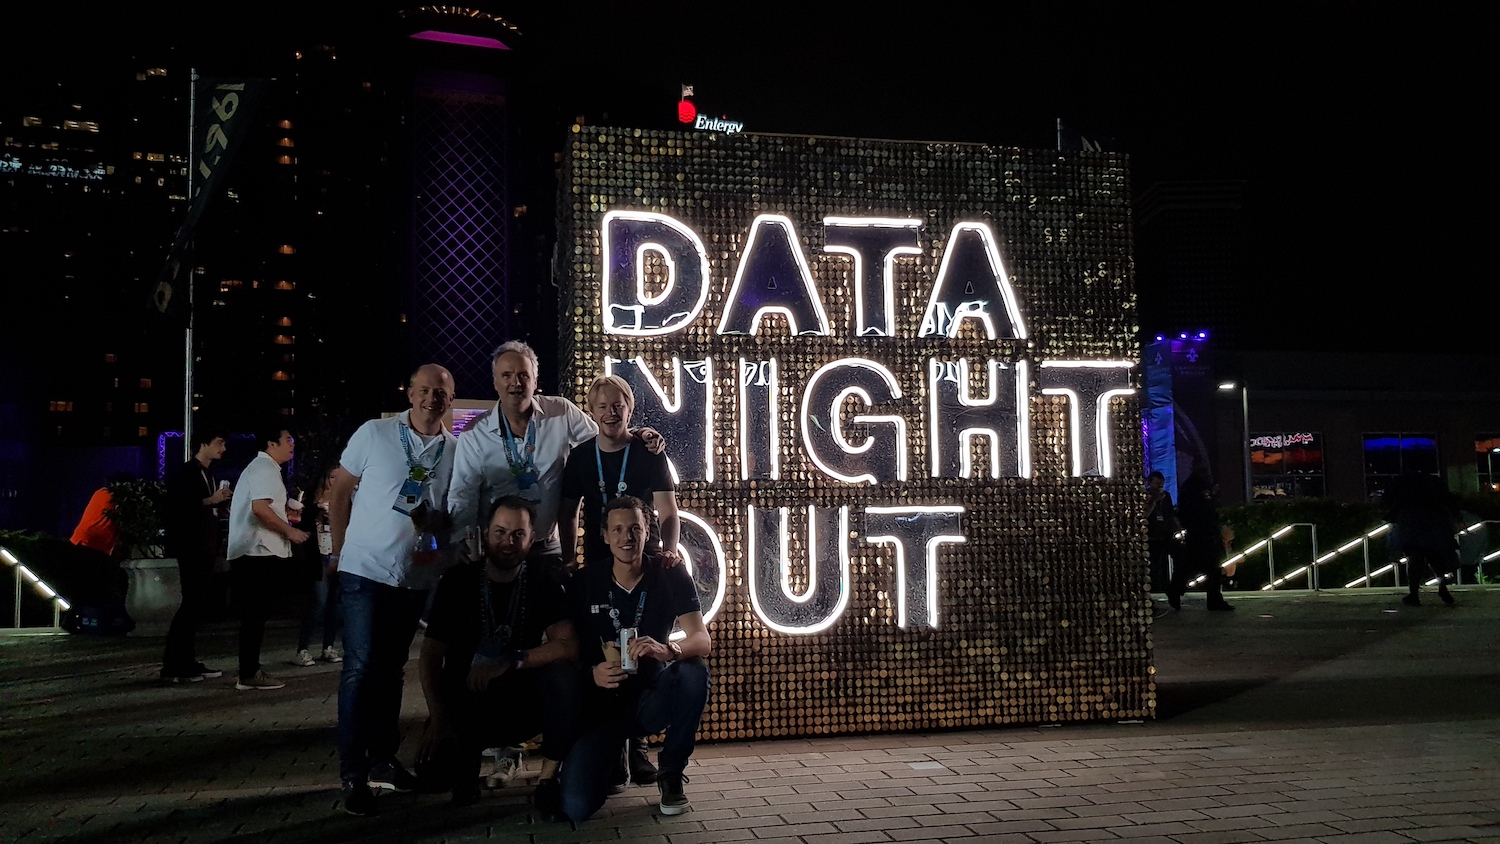 Tableau Conference 2018 Highlights Community conference